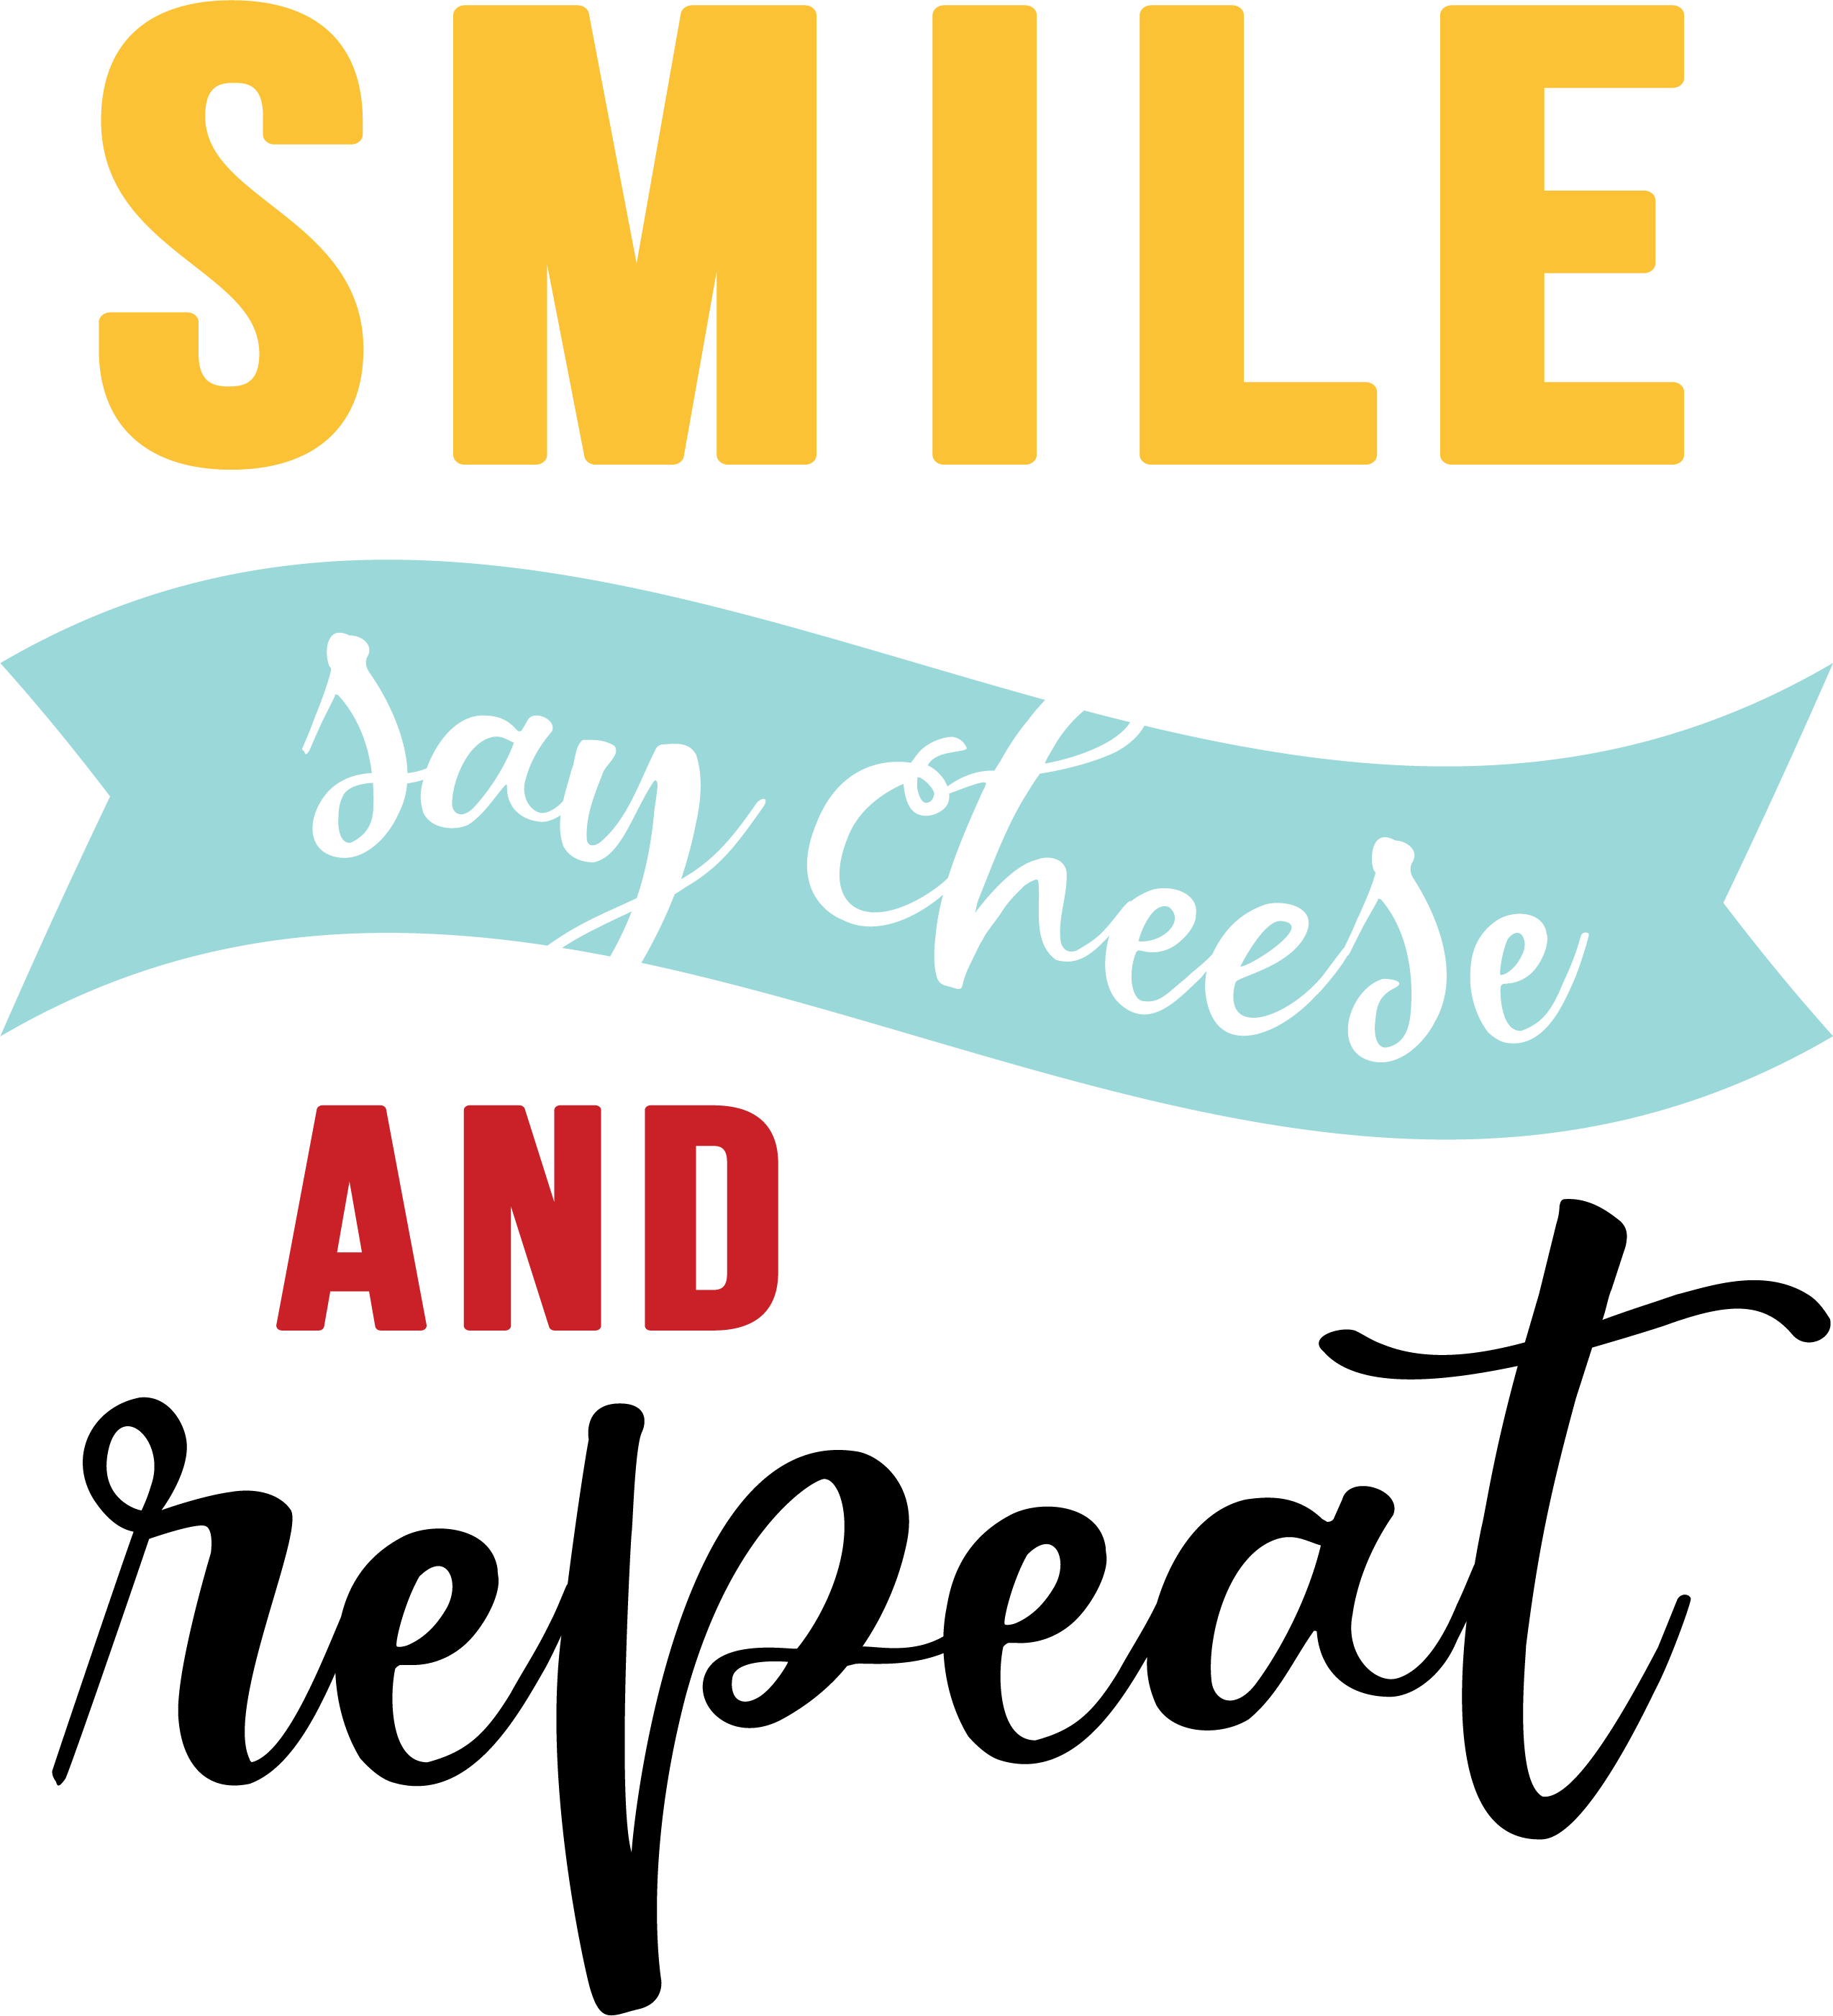 say cheese smile quotes